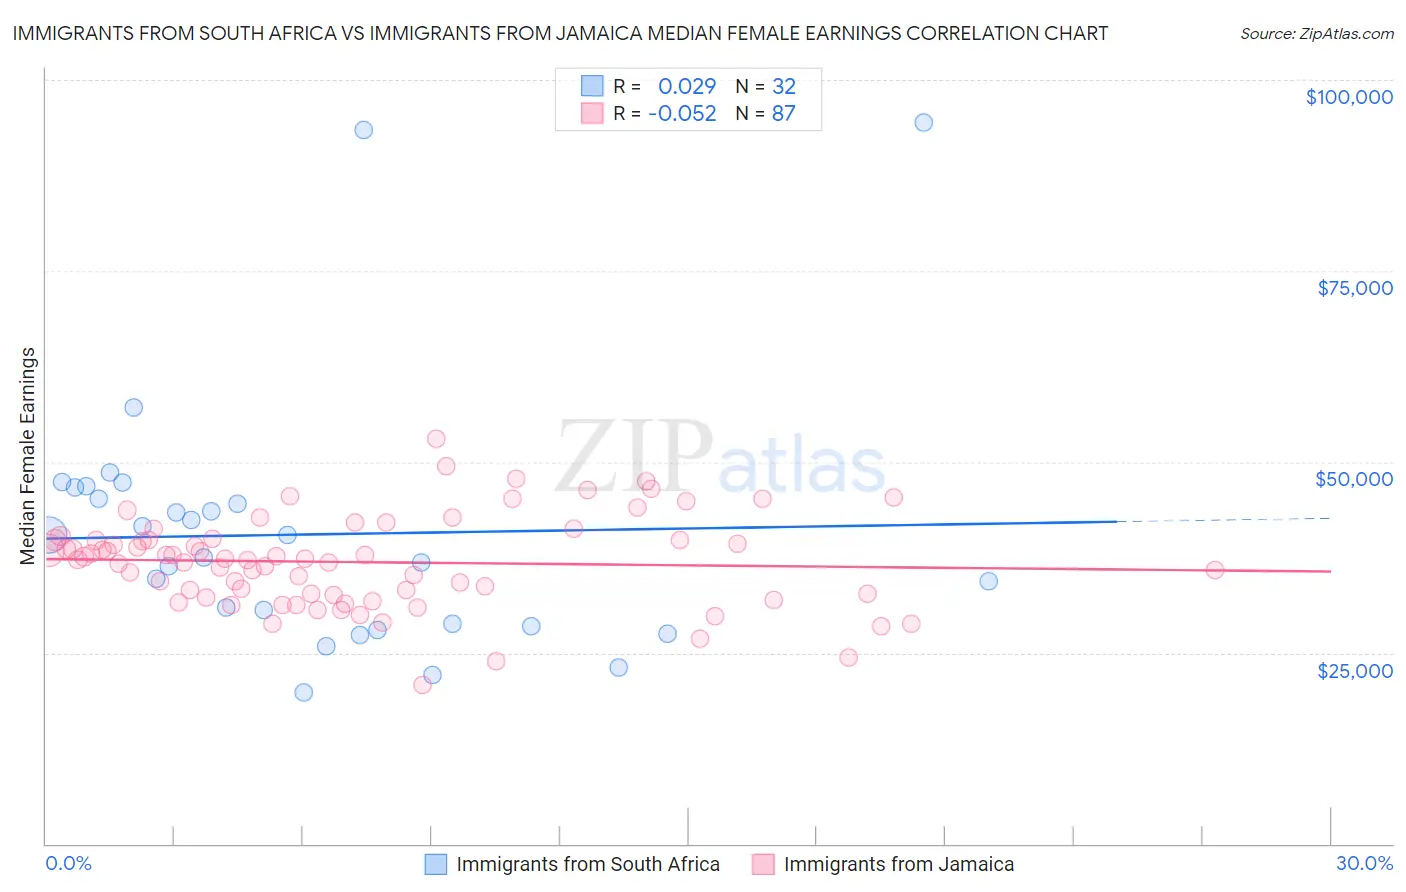 Immigrants from South Africa vs Immigrants from Jamaica Median Female Earnings